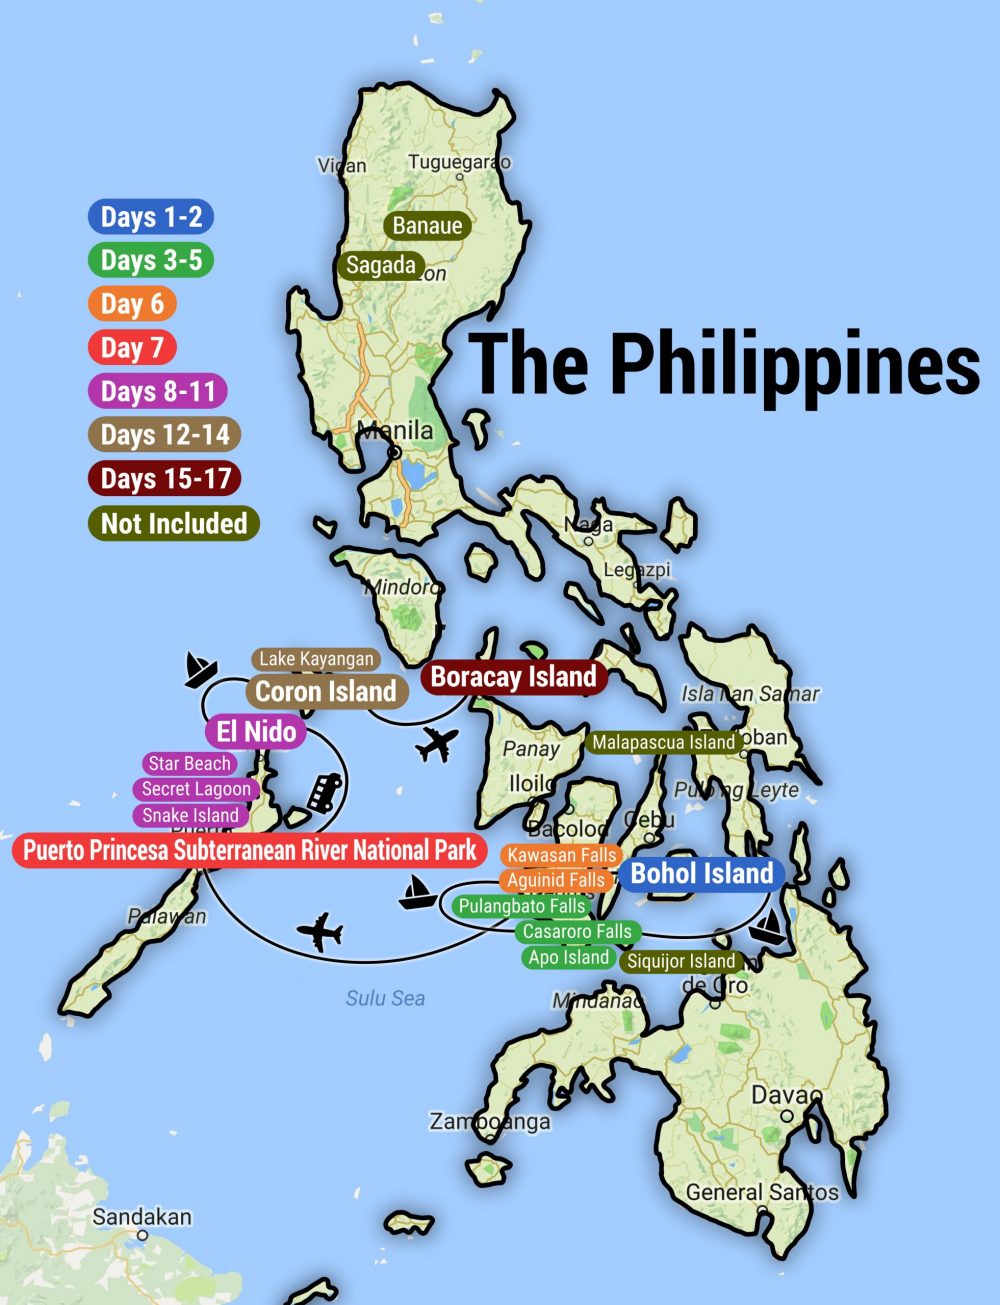 Philippines Itinerary Map Scaled E1587479508888 